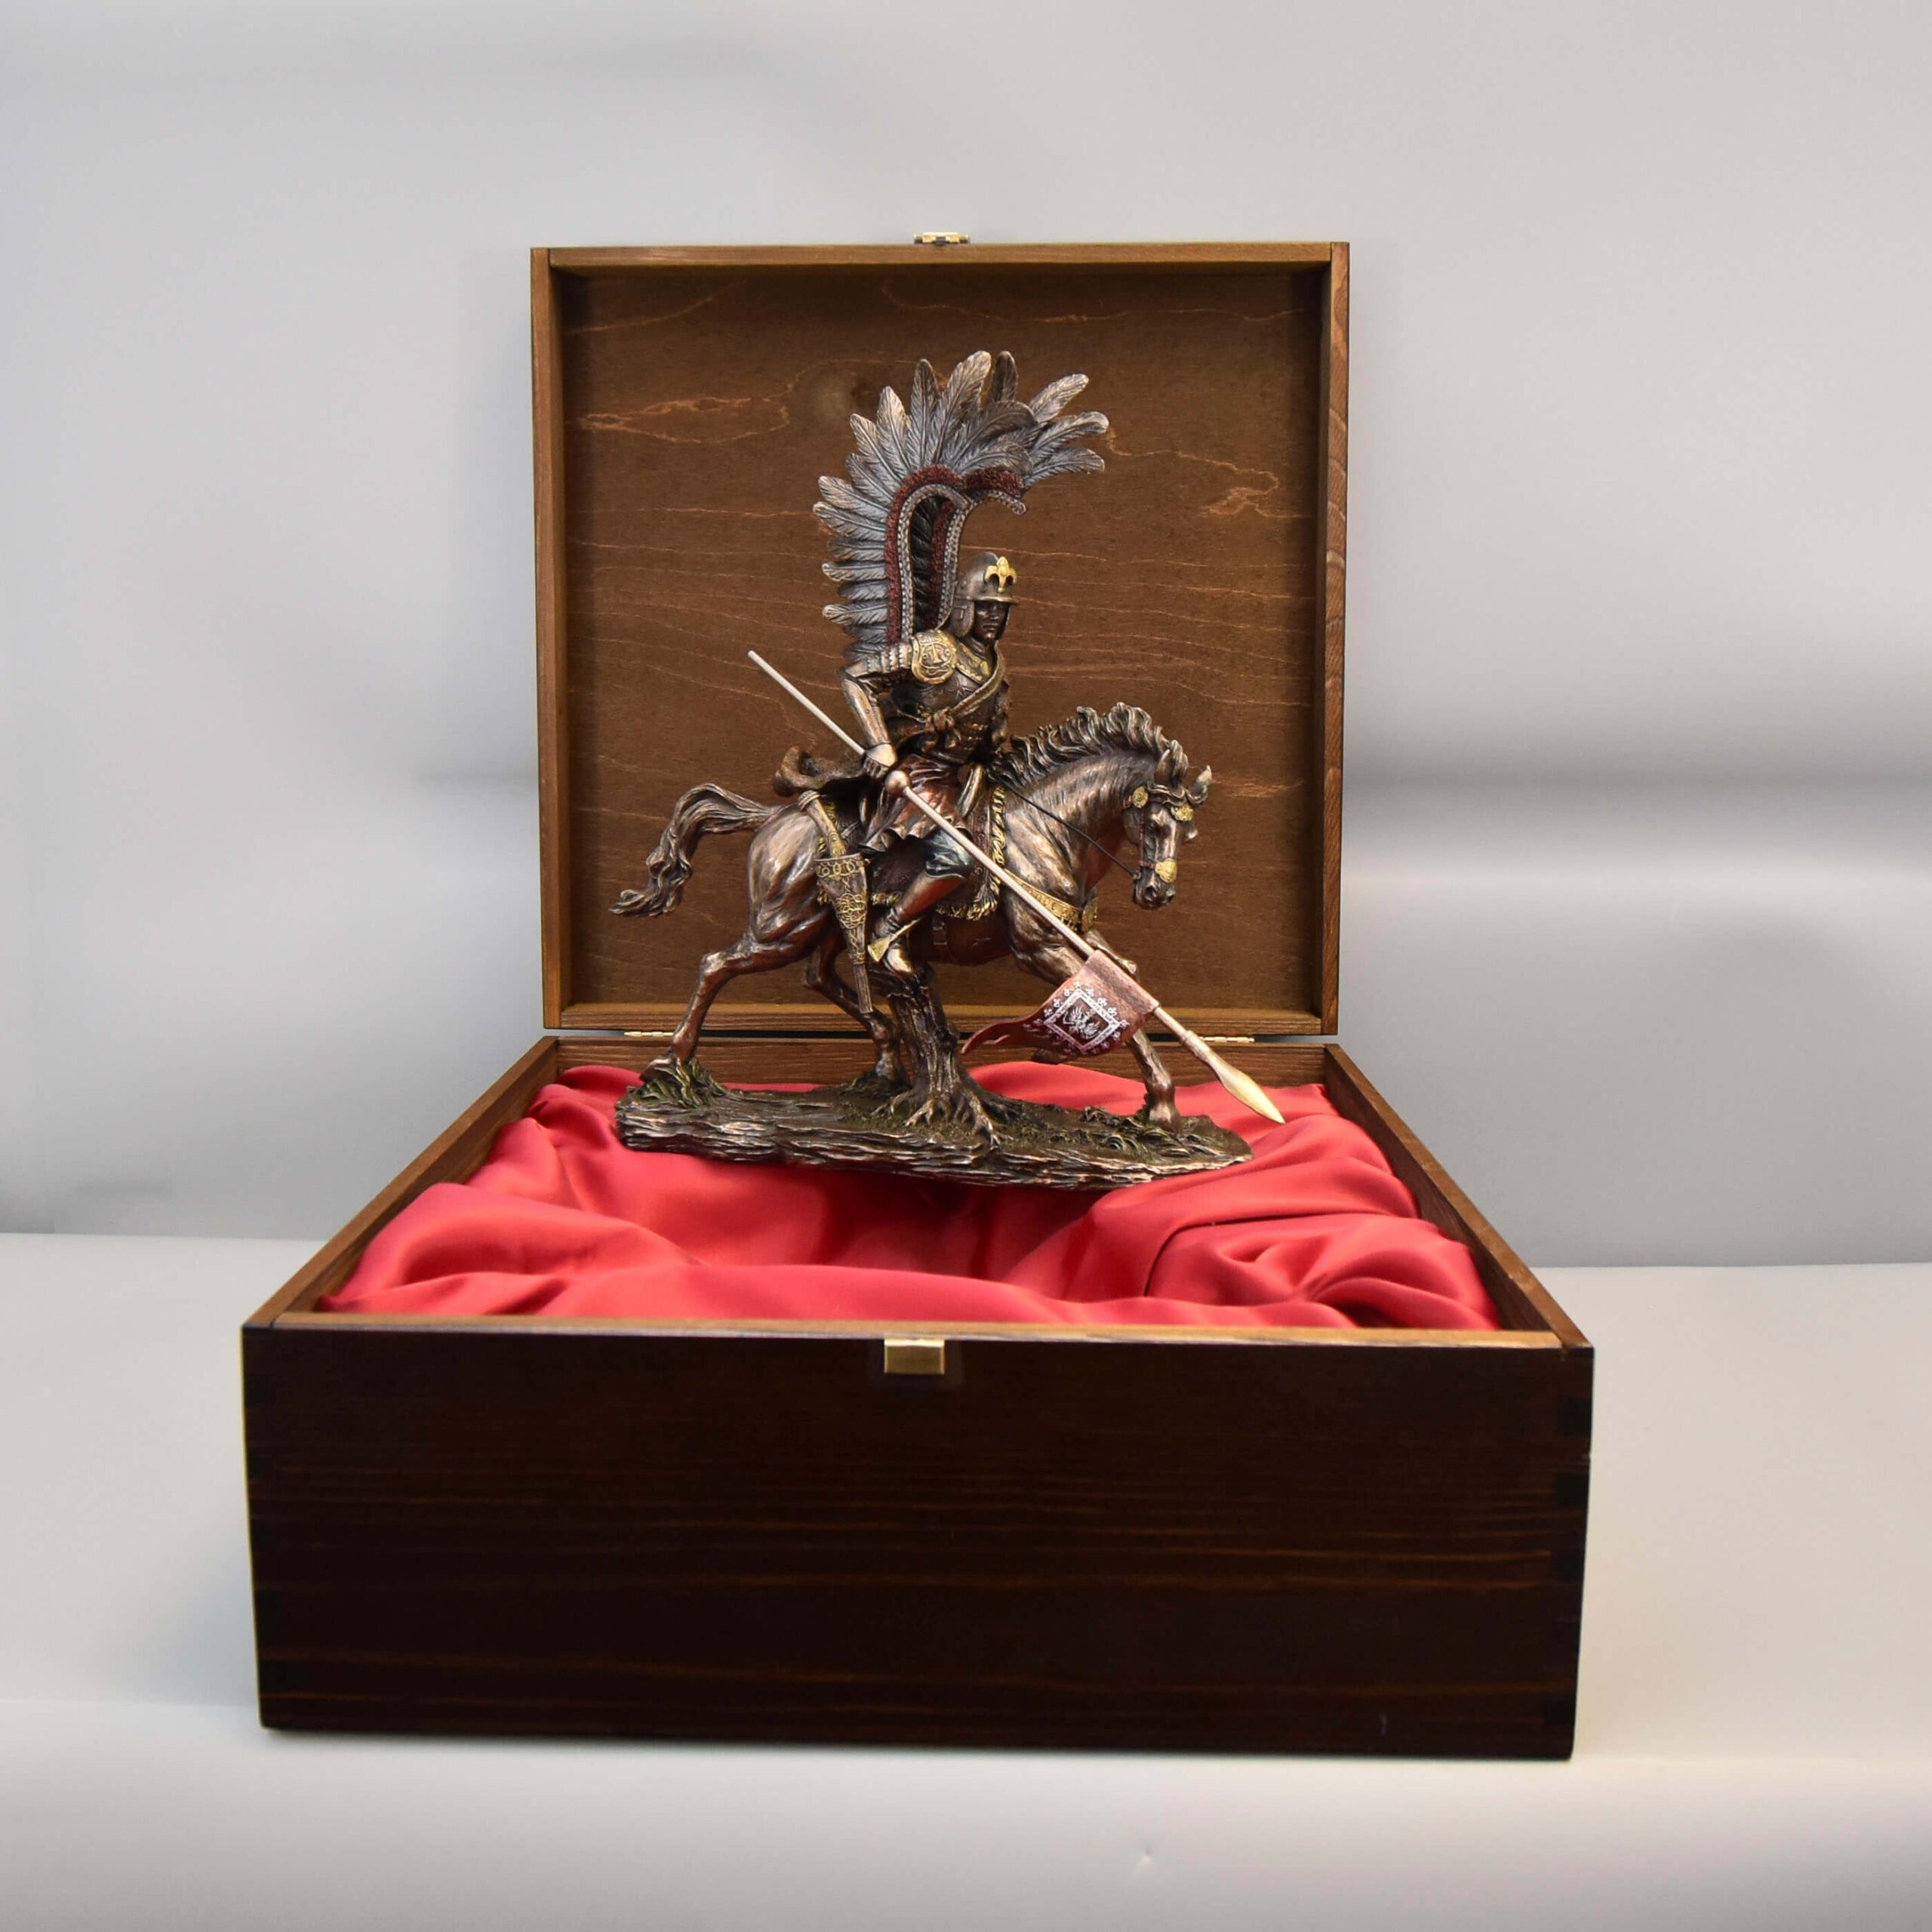 Gift in Gratitude for Service Polish Hussar on Horse in a Gift Box with Dedication